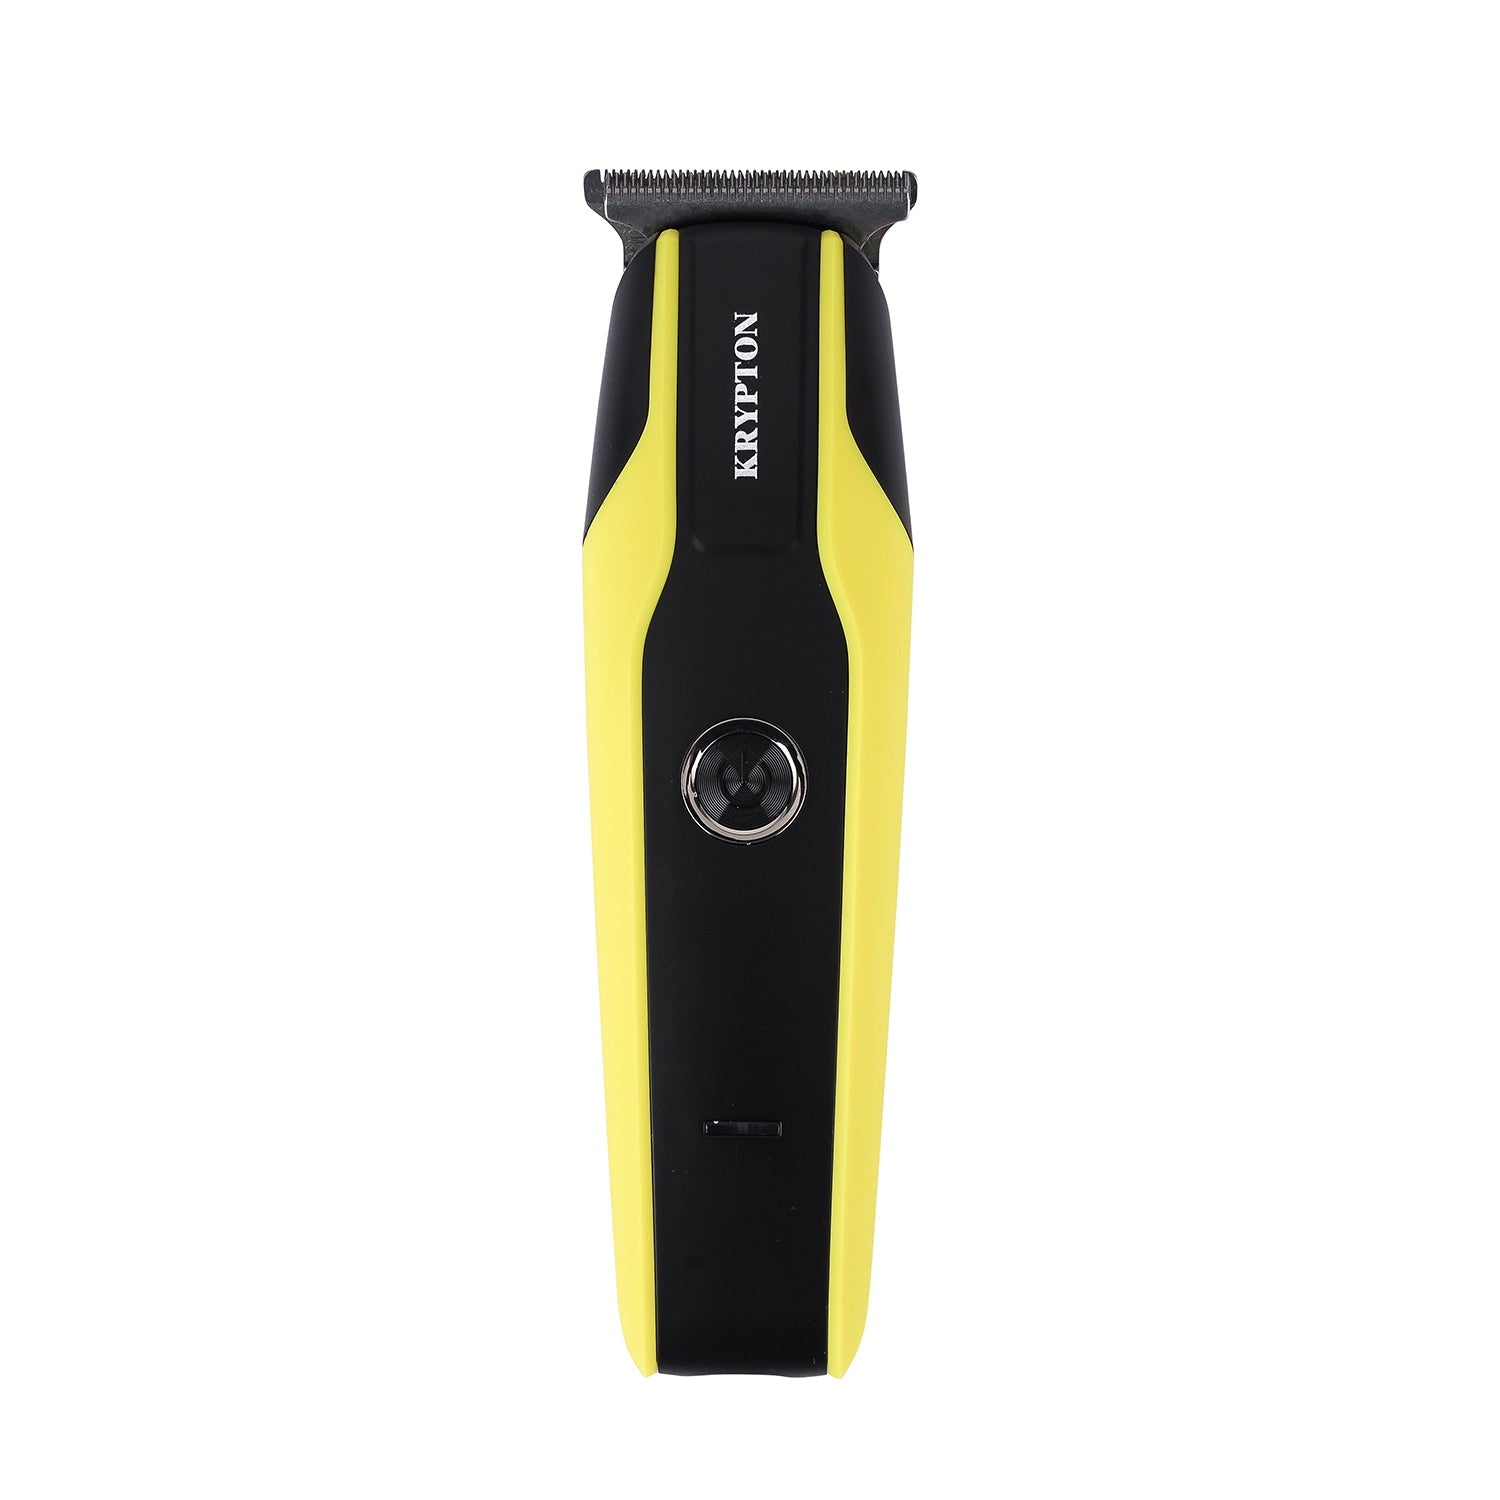 Krypton Rechargeable Trimmer- KNTR6093| 3, 6, 9, 12 mm Combs